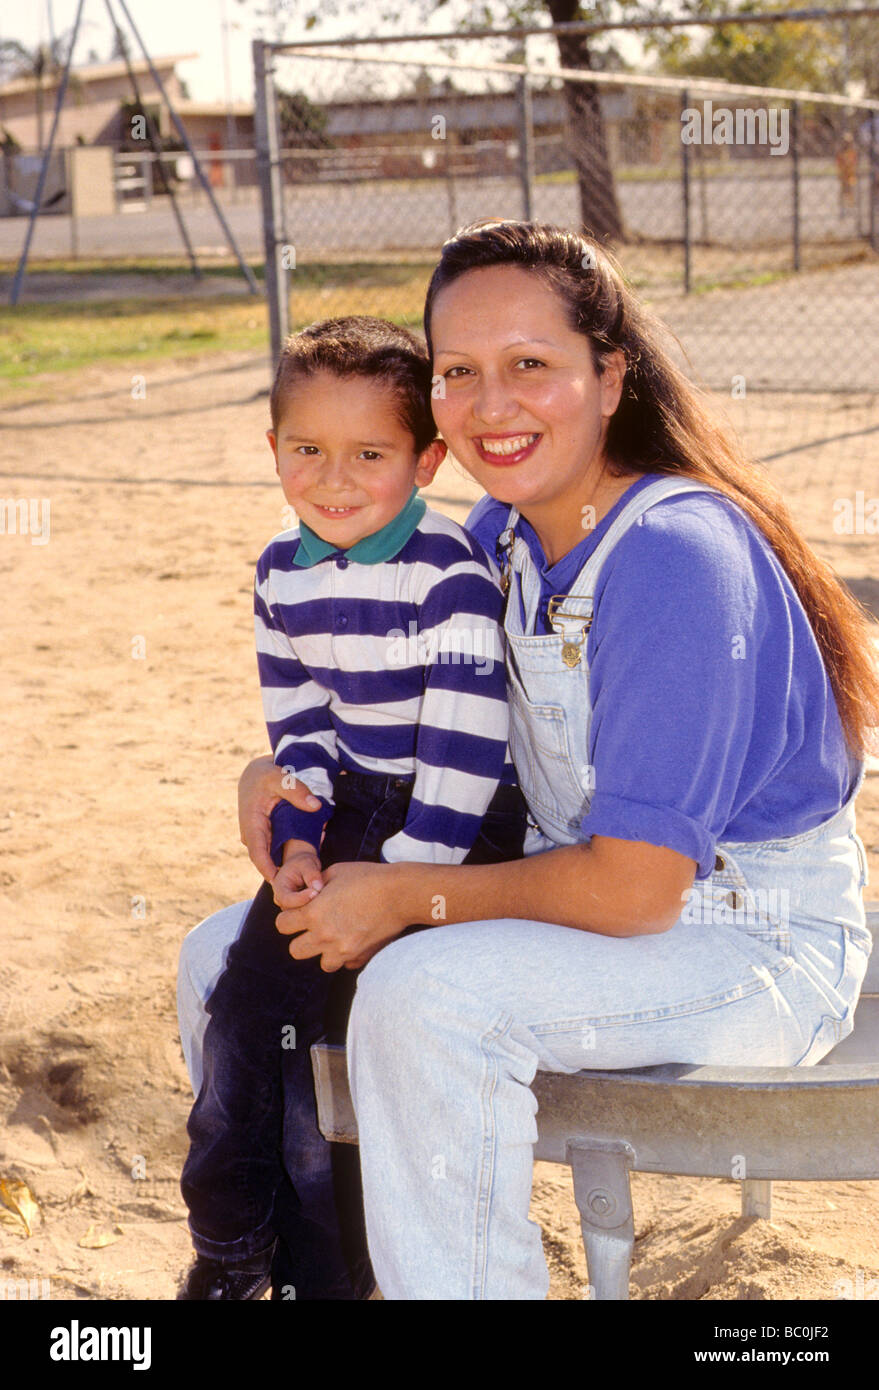 15 Differences Between a Normal Mom and a Mexican Mom